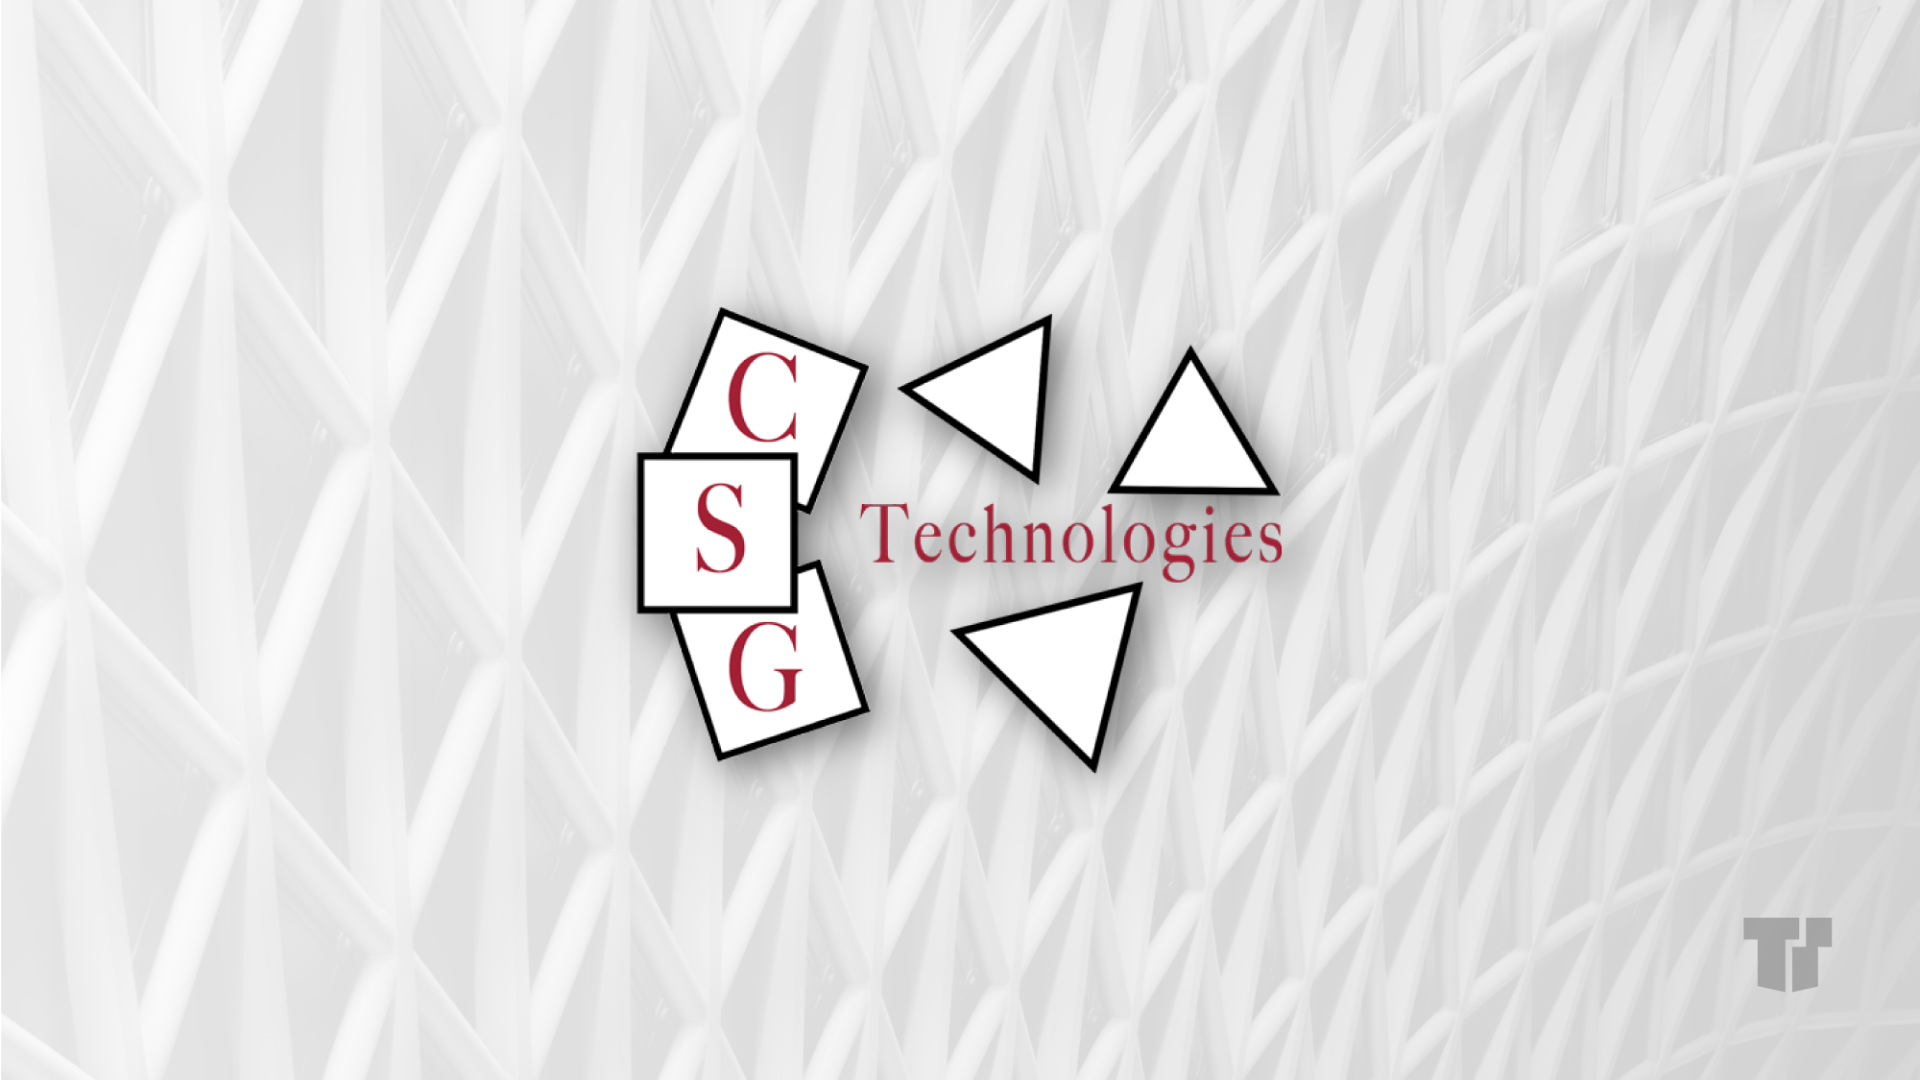 CSG Technologies cover image